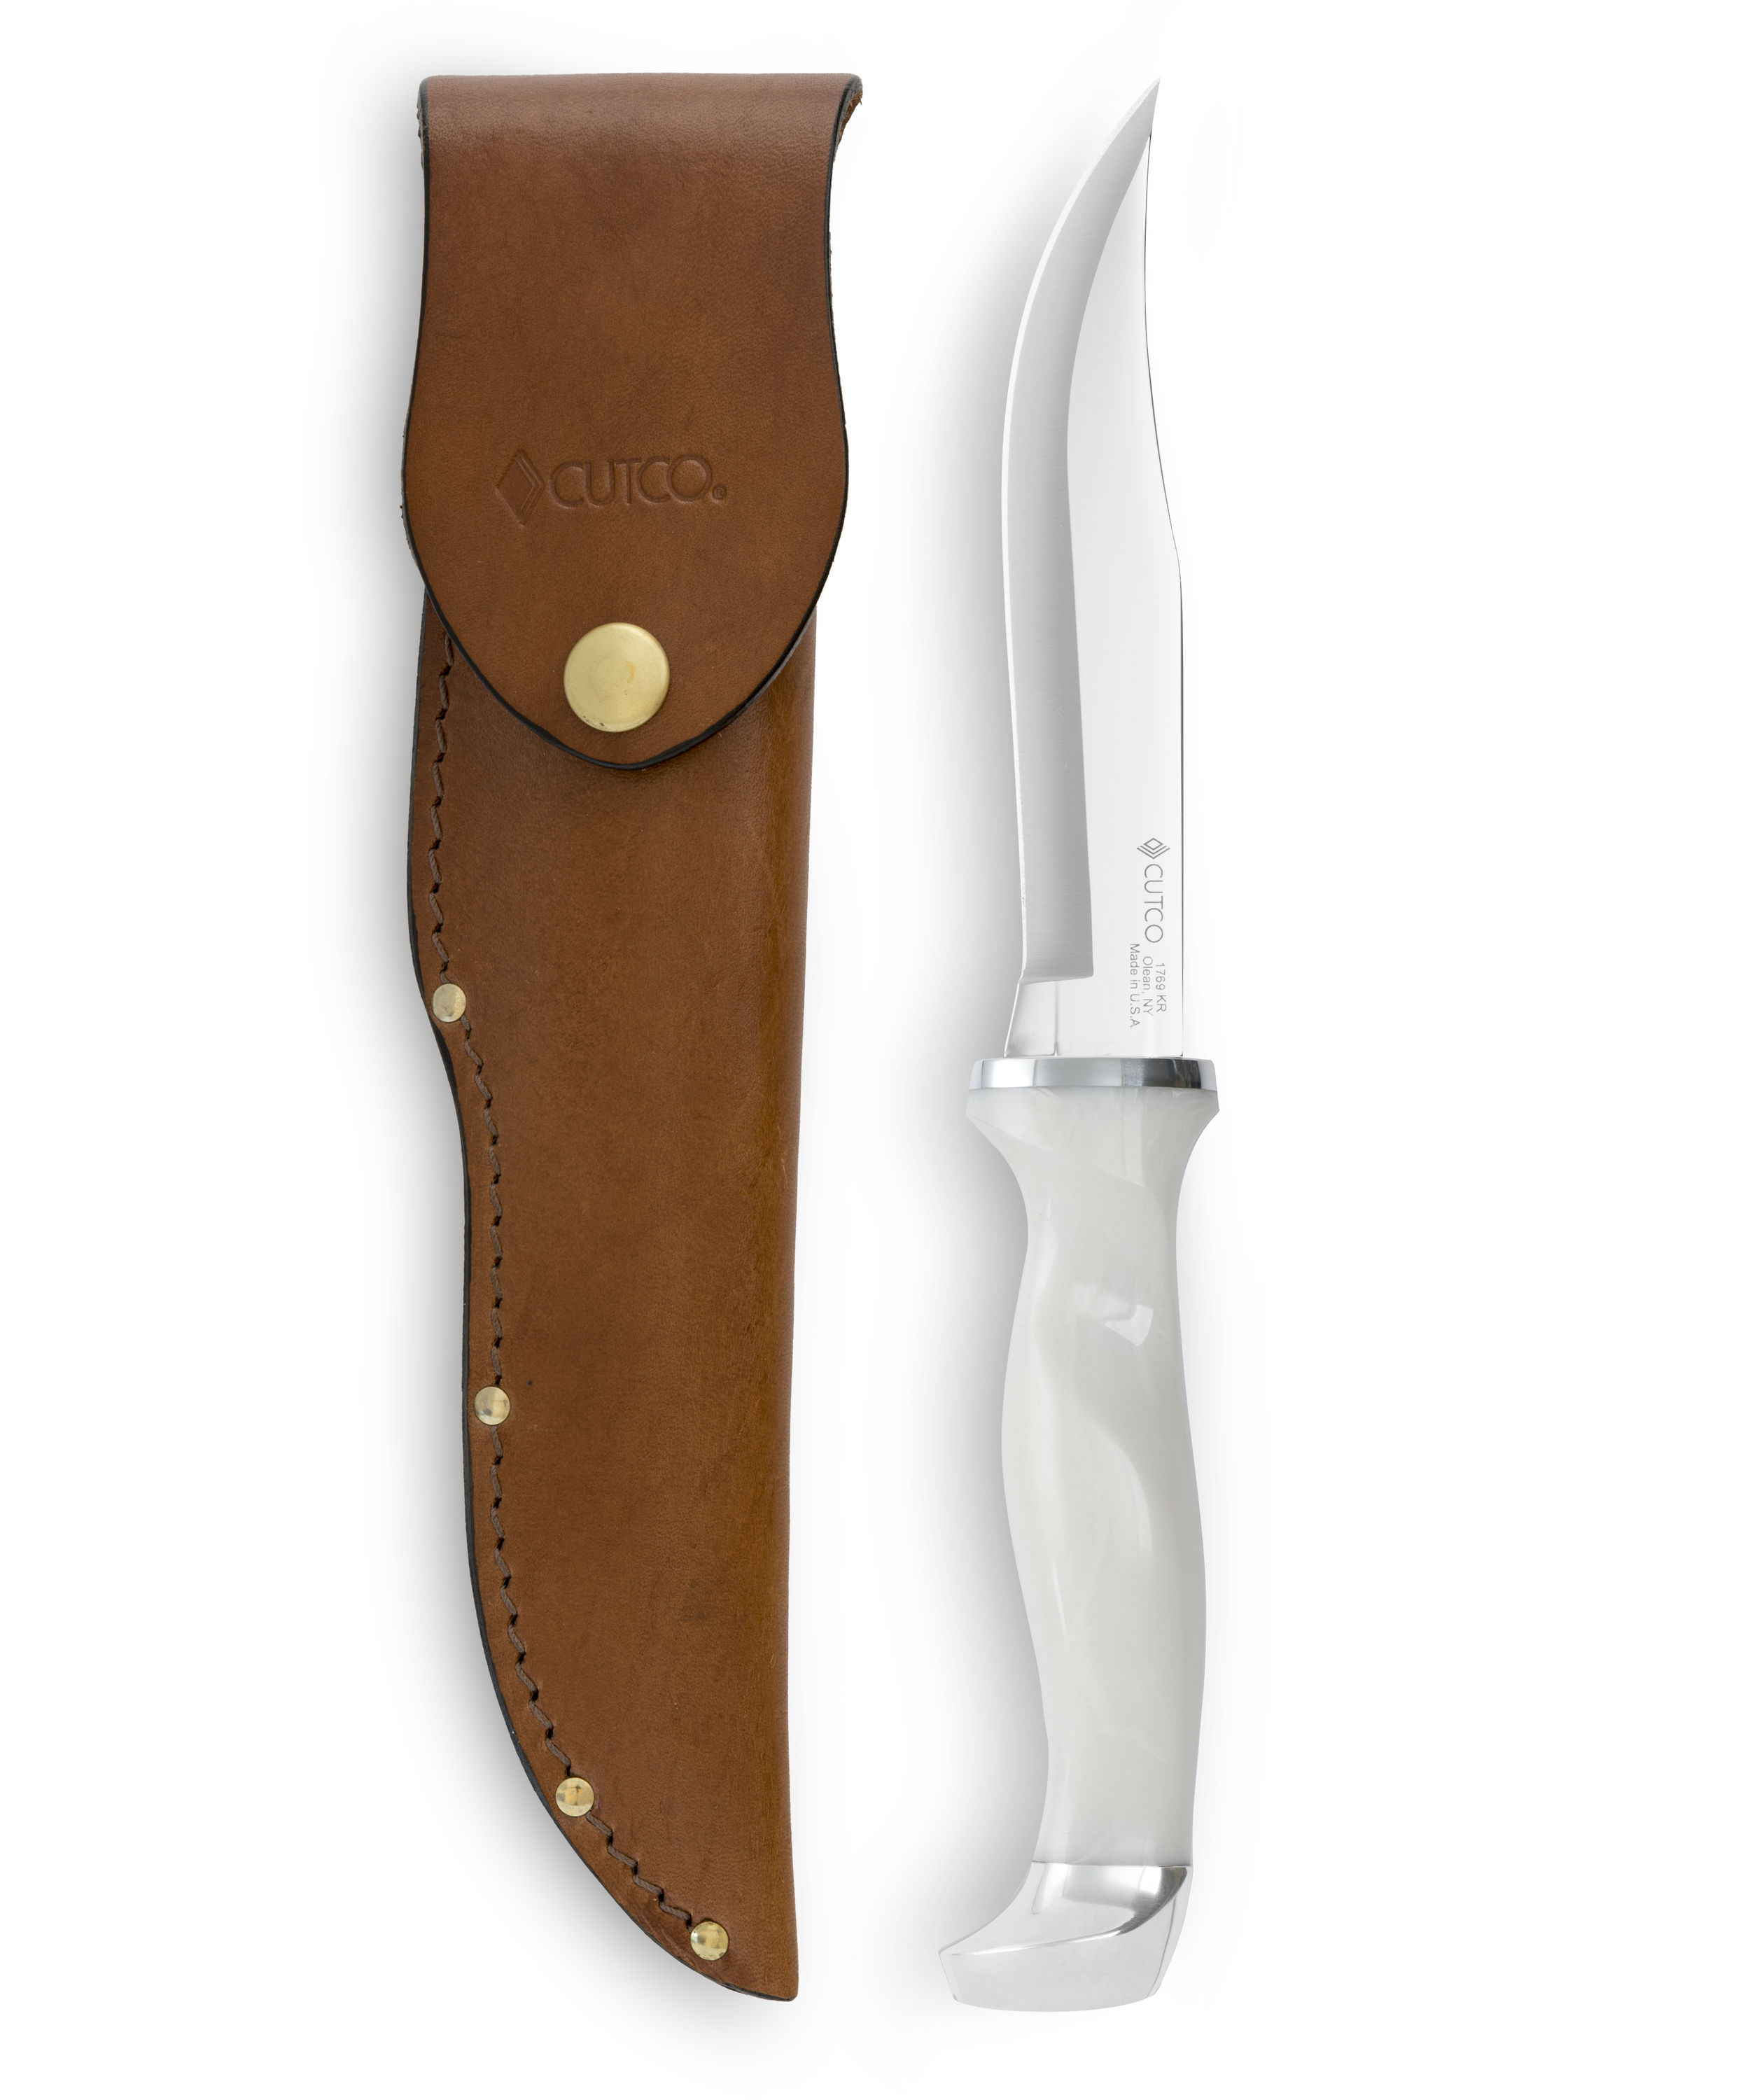 Hunting Knife, Top Rated